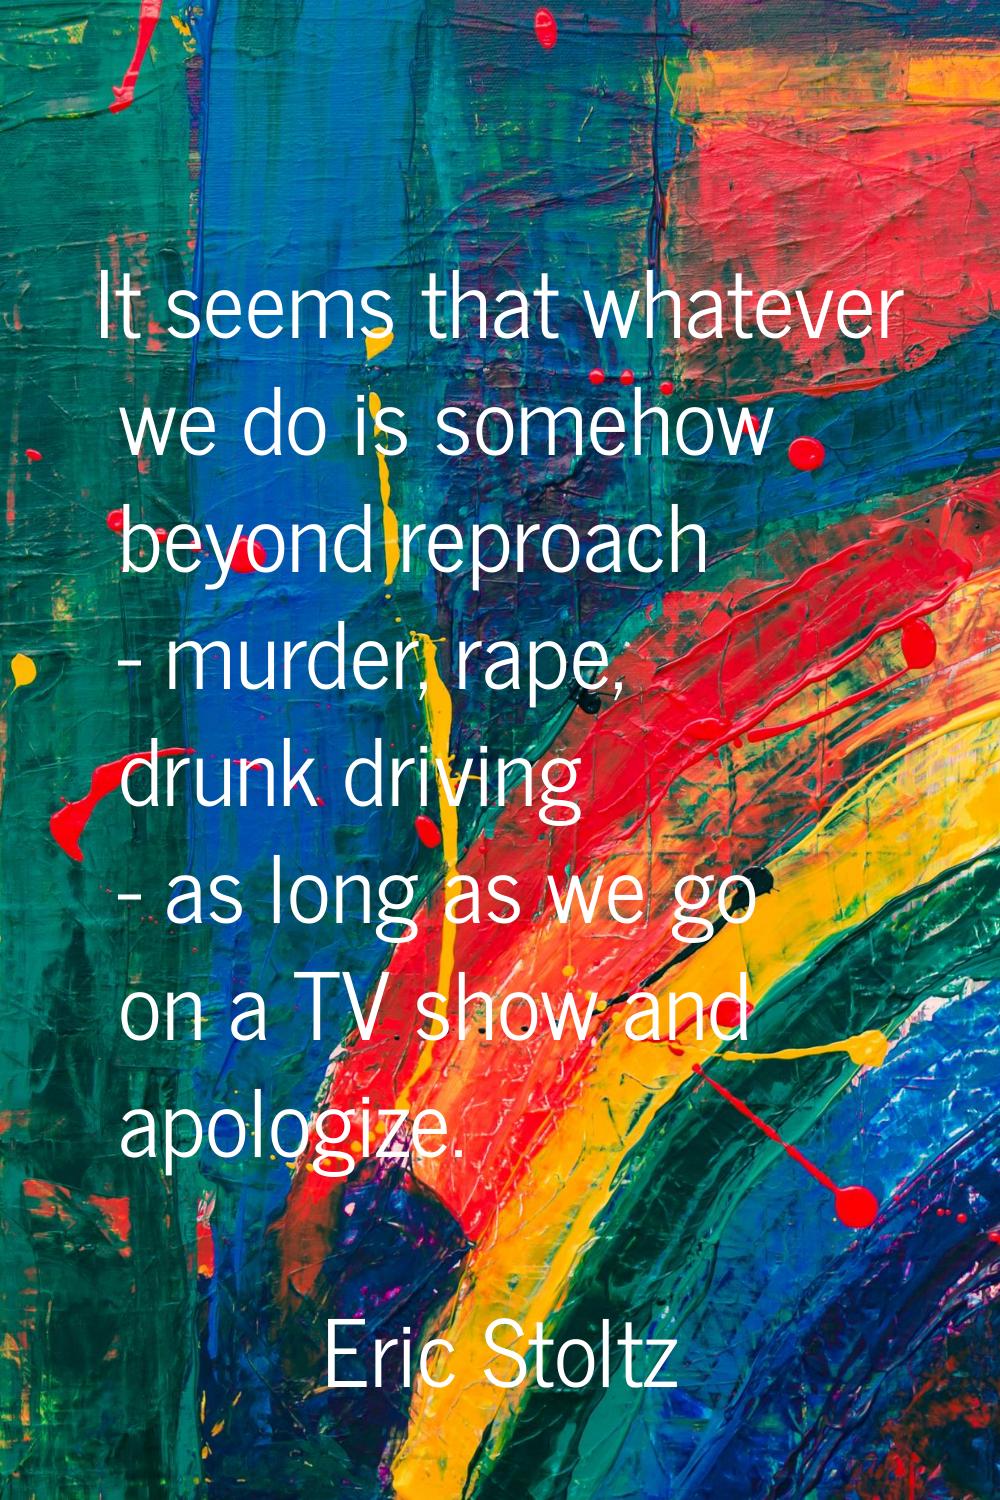 It seems that whatever we do is somehow beyond reproach - murder, rape, drunk driving - as long as 